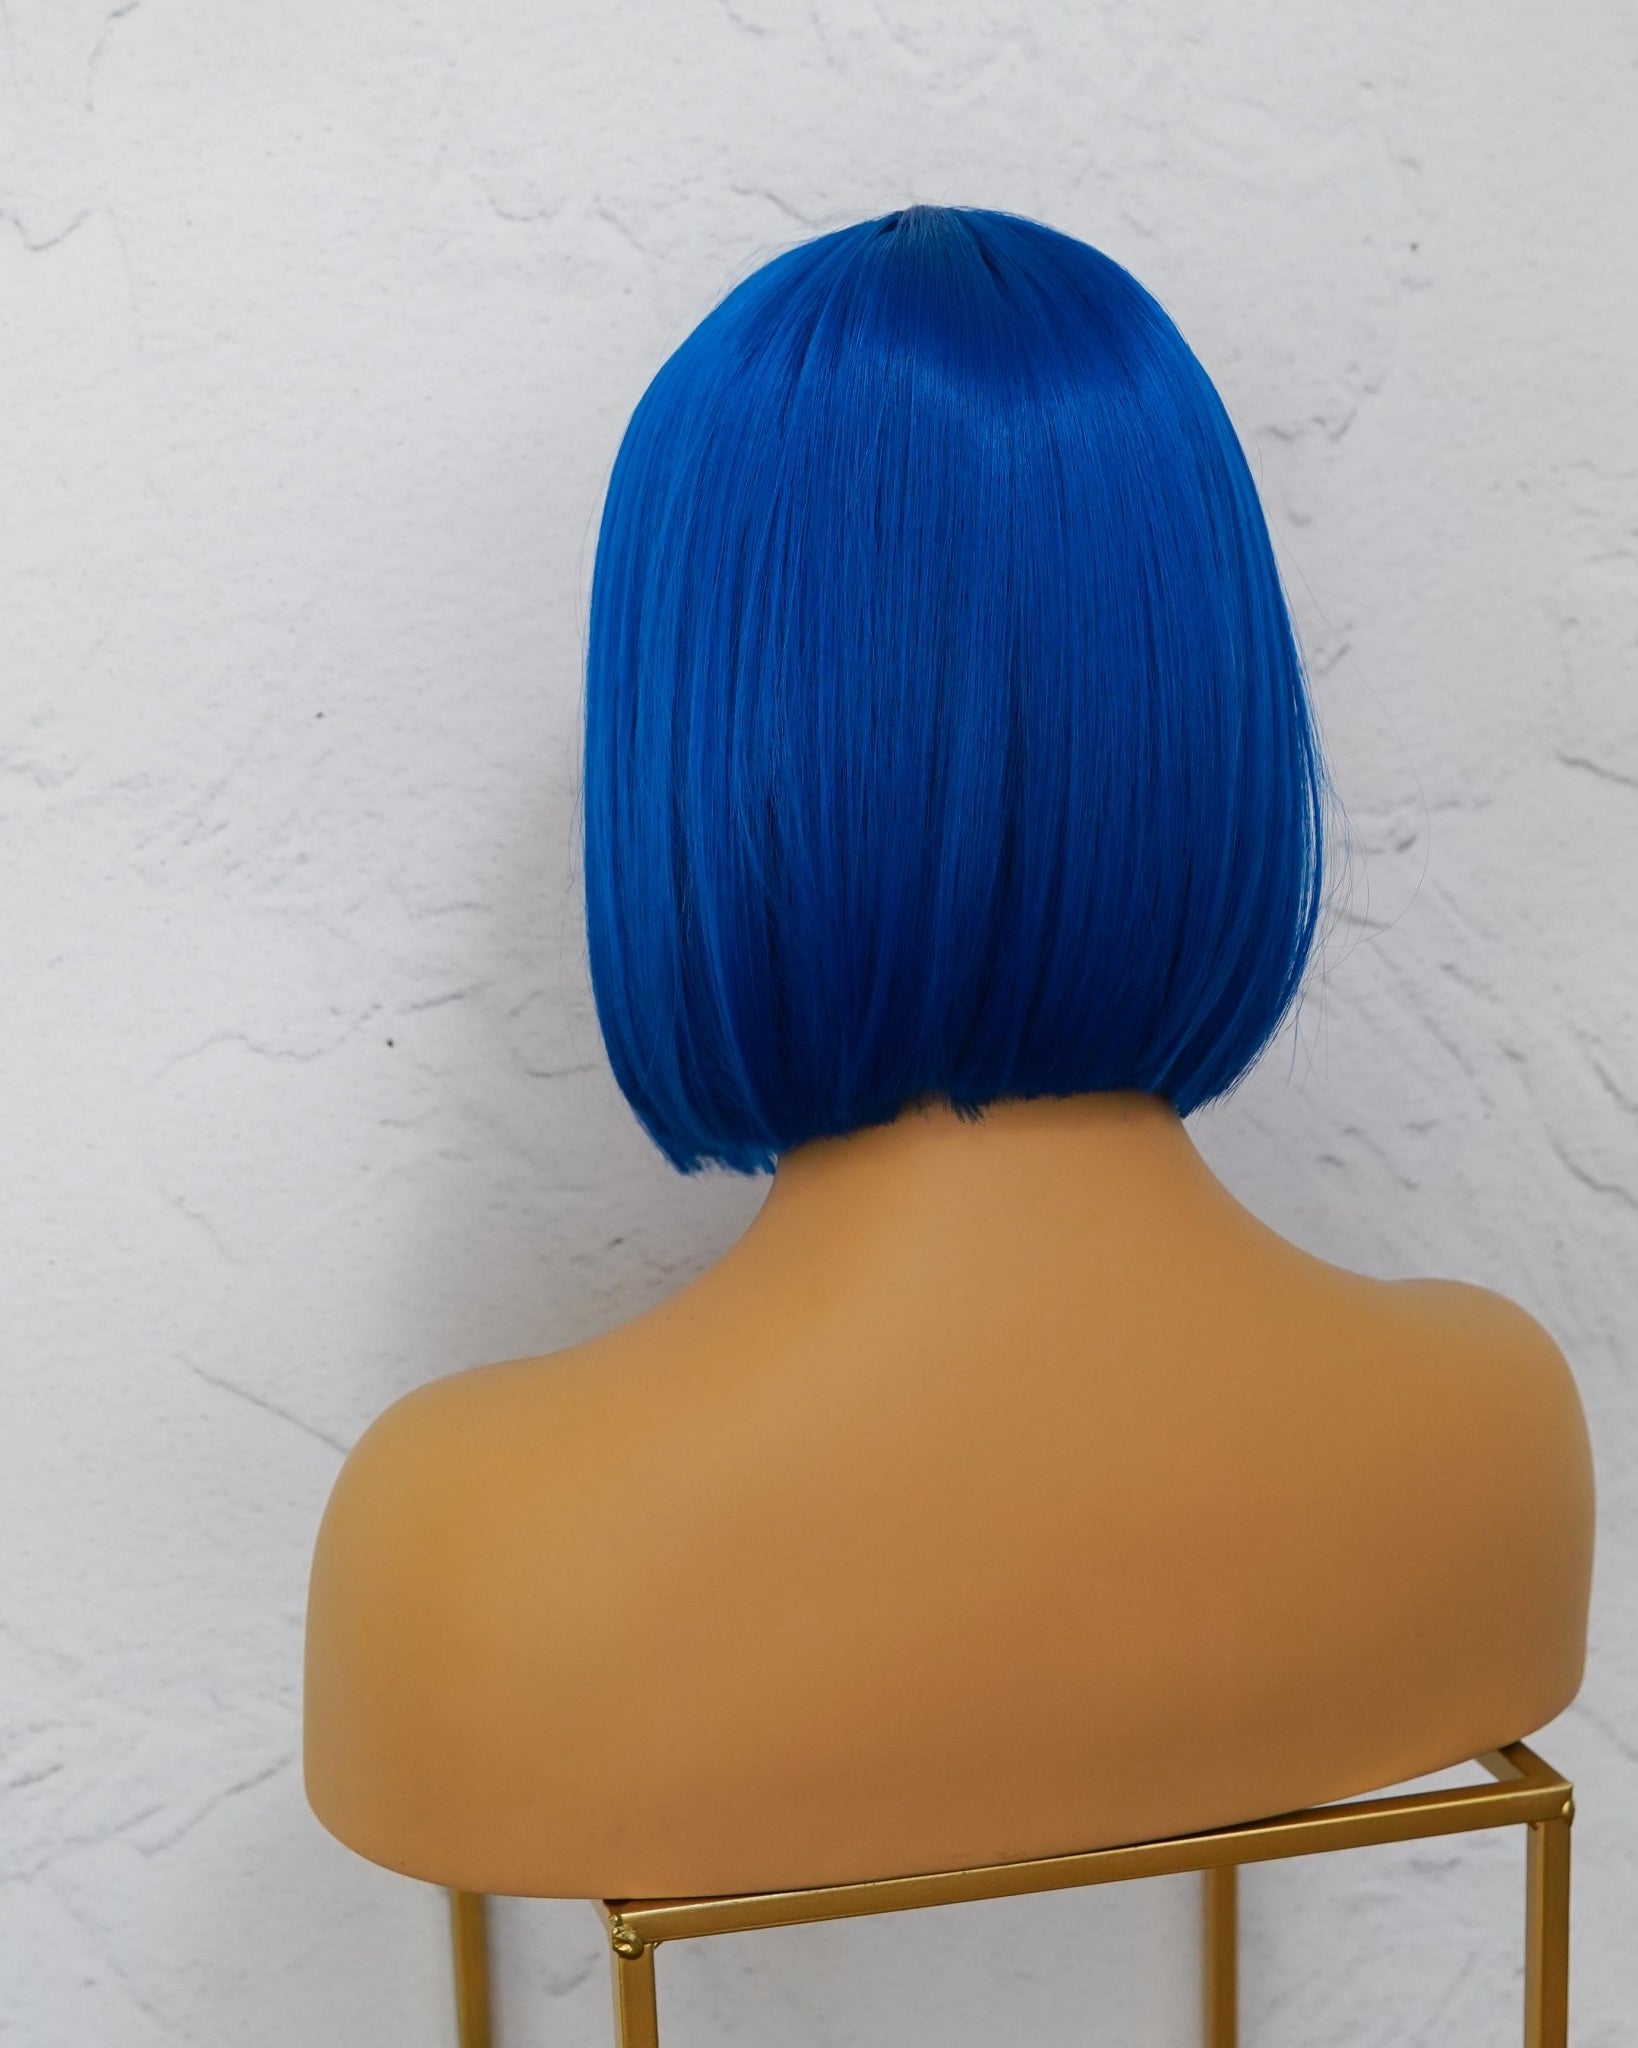 TILLY Blue Lace Front Wig - Milk & Honey